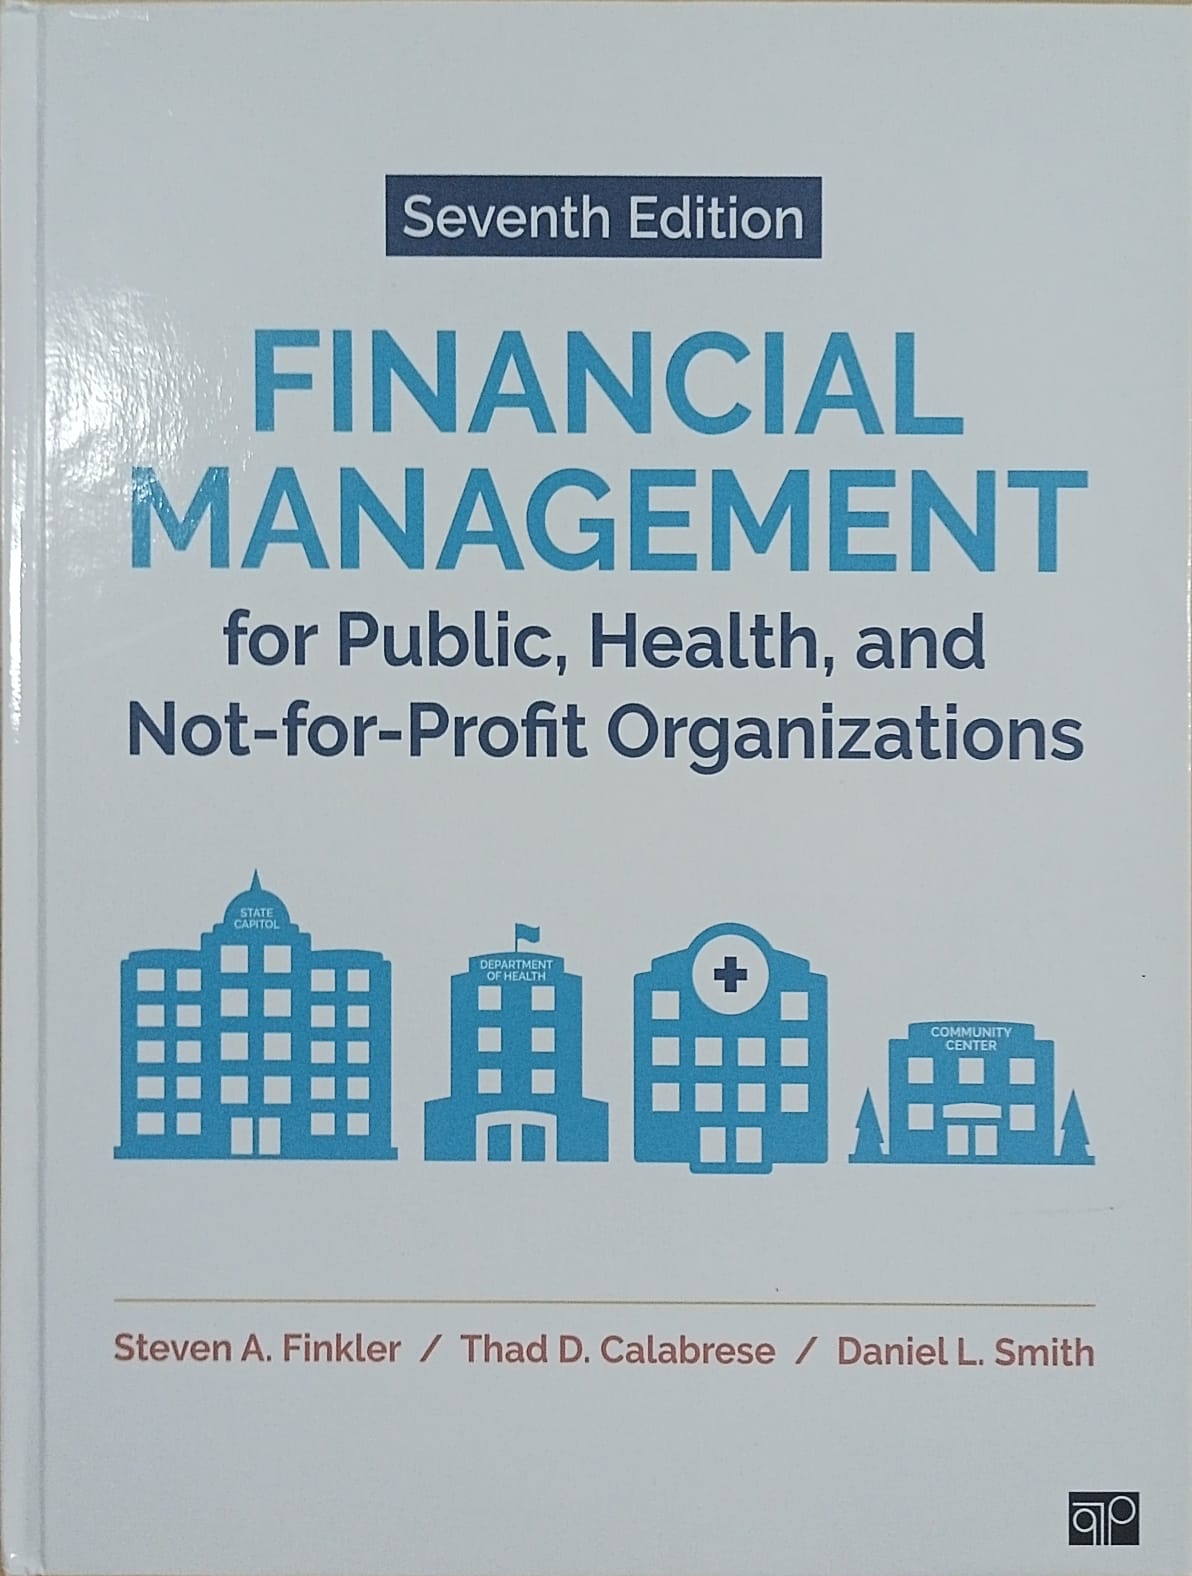 Financial management for public, health, and non-for-profit organizations 7th edition